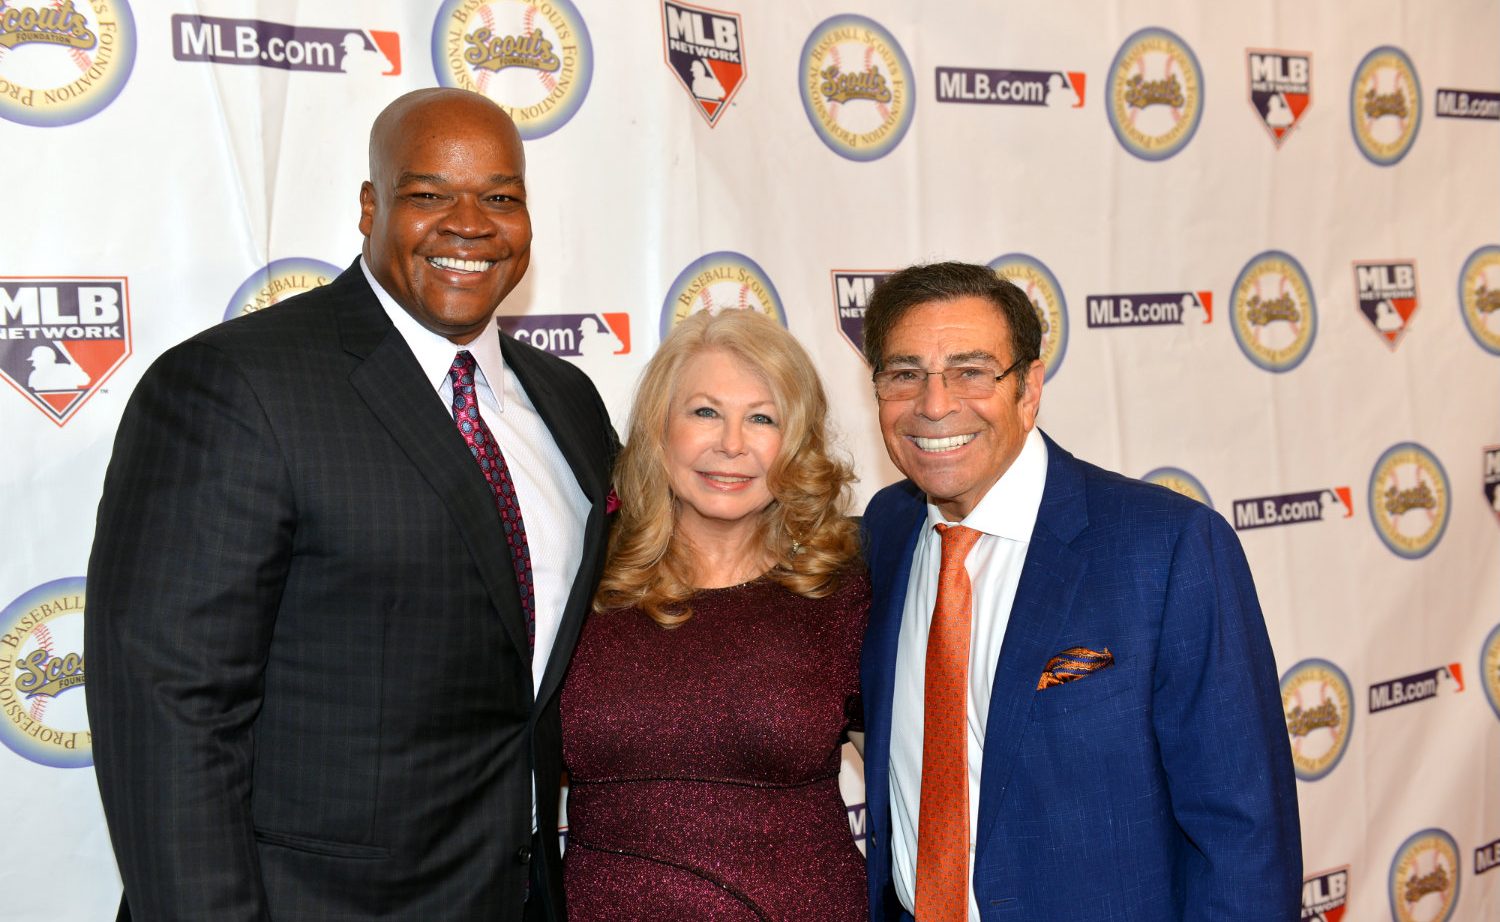 Stars align for Professional Baseball Scouts Foundation's 'In the Spirit of  the Game' gala – News4usonline